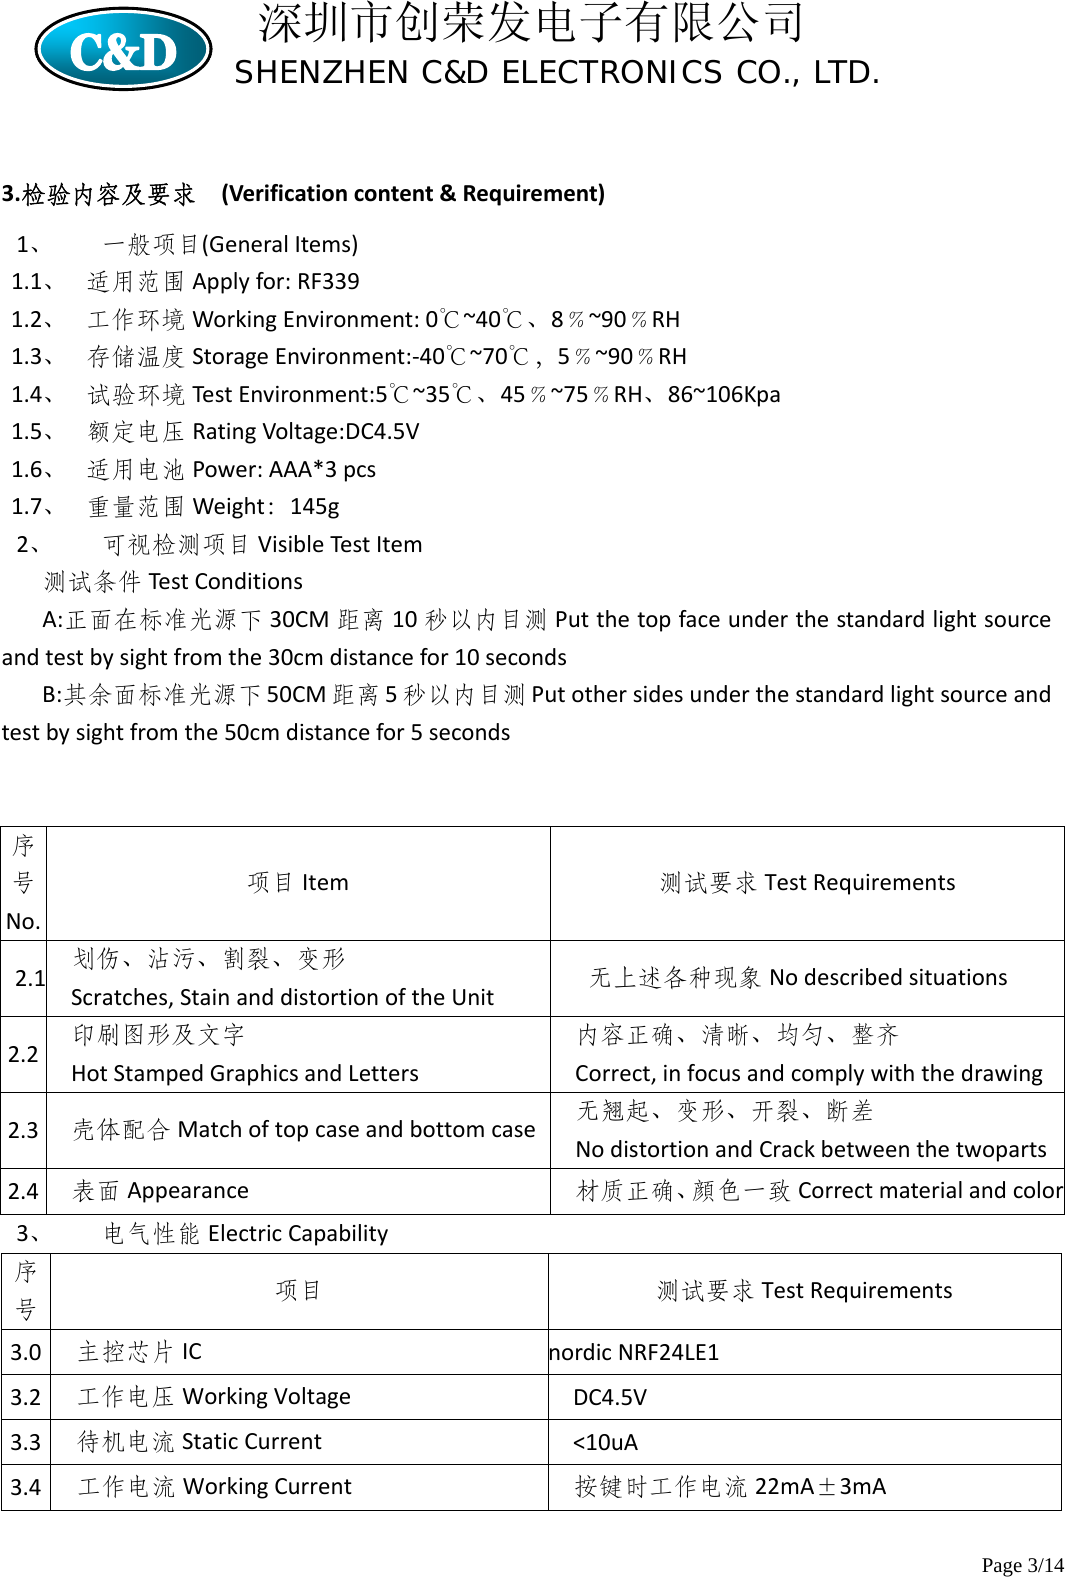 深圳市创荣发电子有限公司                        SHENZHEN C&amp;D ELECTRONICS CO., LTD.                  Page 3/14 3.检验内容及要求(Verificationcontent&amp;Requirement)1、 一般项目(GeneralItems)1.1、 适用范围 Applyfor:RF3391.2、 工作环境 WorkingEnvironment:0℃~40℃、8﹪~90﹪RH1.3、 存储温度 StorageEnvironment:‐40℃~70℃，5﹪~90﹪RH1.4、 试验环境 TestEnvironment:5℃~35℃、45﹪~75﹪RH、86~106Kpa1.5、 额定电压 RatingVoltage:DC4.5V1.6、 适用电池 Power:AAA*3pcs1.7、 重量范围 Weight：145g2、 可视检测项目 VisibleTestItem测试条件 TestConditionsA:正面在标准光源下 30CM 距离 10 秒以内目测 Putthetopfaceunderthestandardlightsourceandtestbysightfromthe30cmdistancefor10secondsB:其余面标准光源下 50CM 距离 5秒以内目测 Putothersidesunderthestandardlightsourceandtestbysightfromthe50cmdistancefor5seconds序号No.项目 Item测试要求 TestRequirements2.1 划伤、沾污、割裂、变形Scratches,StainanddistortionoftheUnit无上述各种现象 Nodescribedsituations2.2印刷图形及文字HotStampedGraphicsandLetters内容正确、清晰、均匀、整齐Correct,infocusandcomplywiththedrawing2.3壳体配合 Matchoftopcaseandbottomcase 无翘起、变形、开裂、断差NodistortionandCrackbetweenthetwoparts2.4表面 Appearance材质正确、顔色一致 Correctmaterialandcolor3、 电气性能 ElectricCapability序号项目测试要求 TestRequirements3.0主控芯片 ICnordicNRF24LE13.2工作电压 WorkingVoltageDC4.5V3.3待机电流 StaticCurrent&lt;10uA3.4工作电流 WorkingCurrent按键时工作电流 22mA±3mA